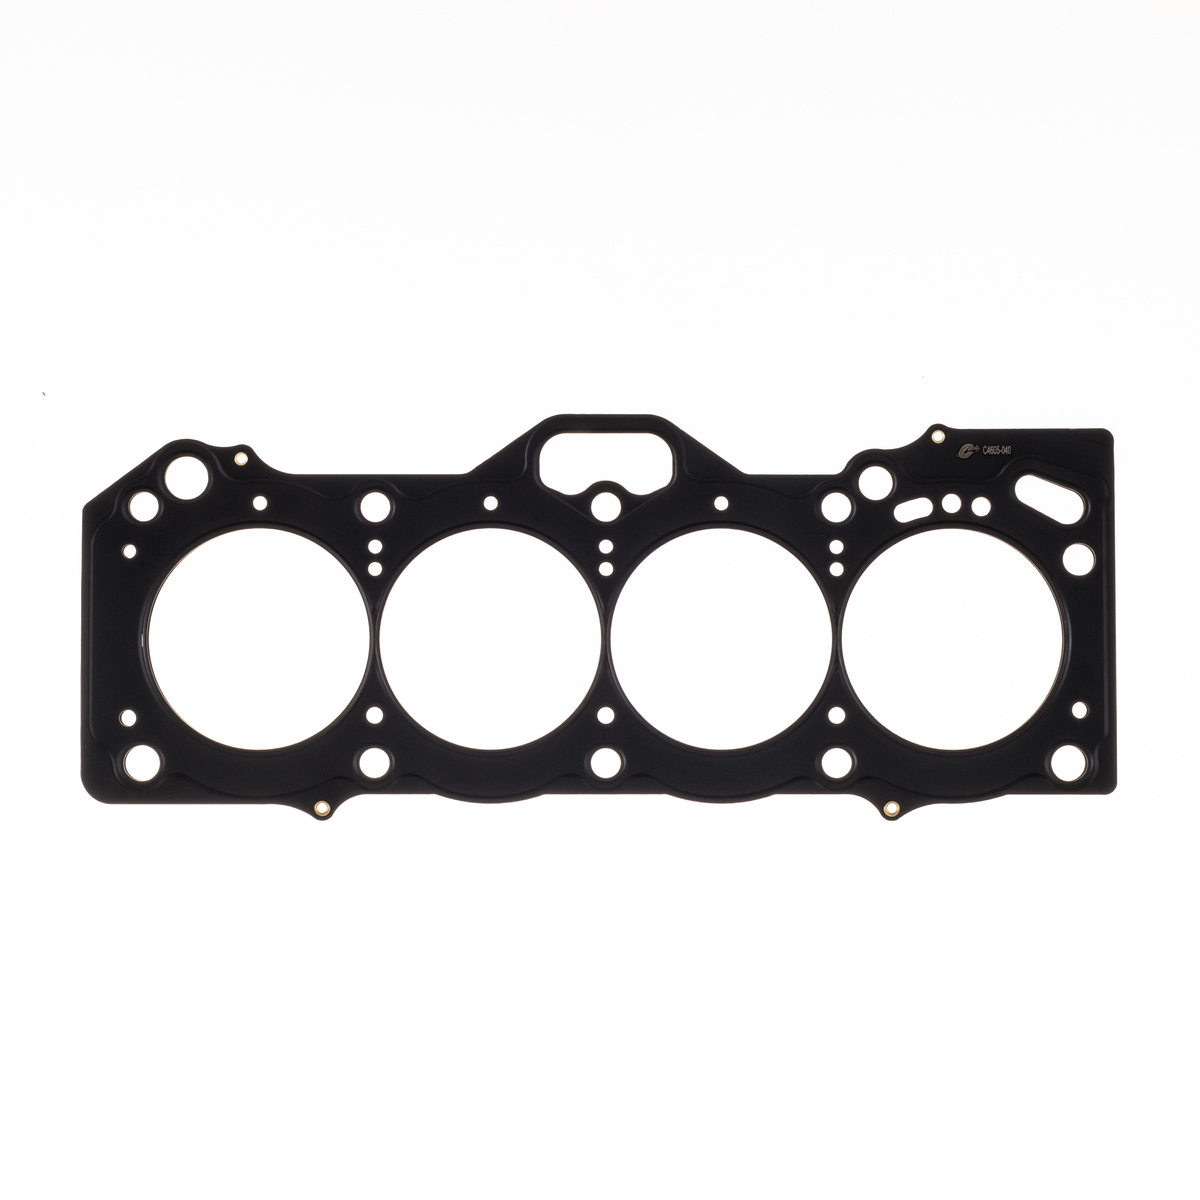 Cylinder Head Gasket Toyota 4A-GE .075" MLS , 81mm Bore, 20-Valve Cometic C4604-075